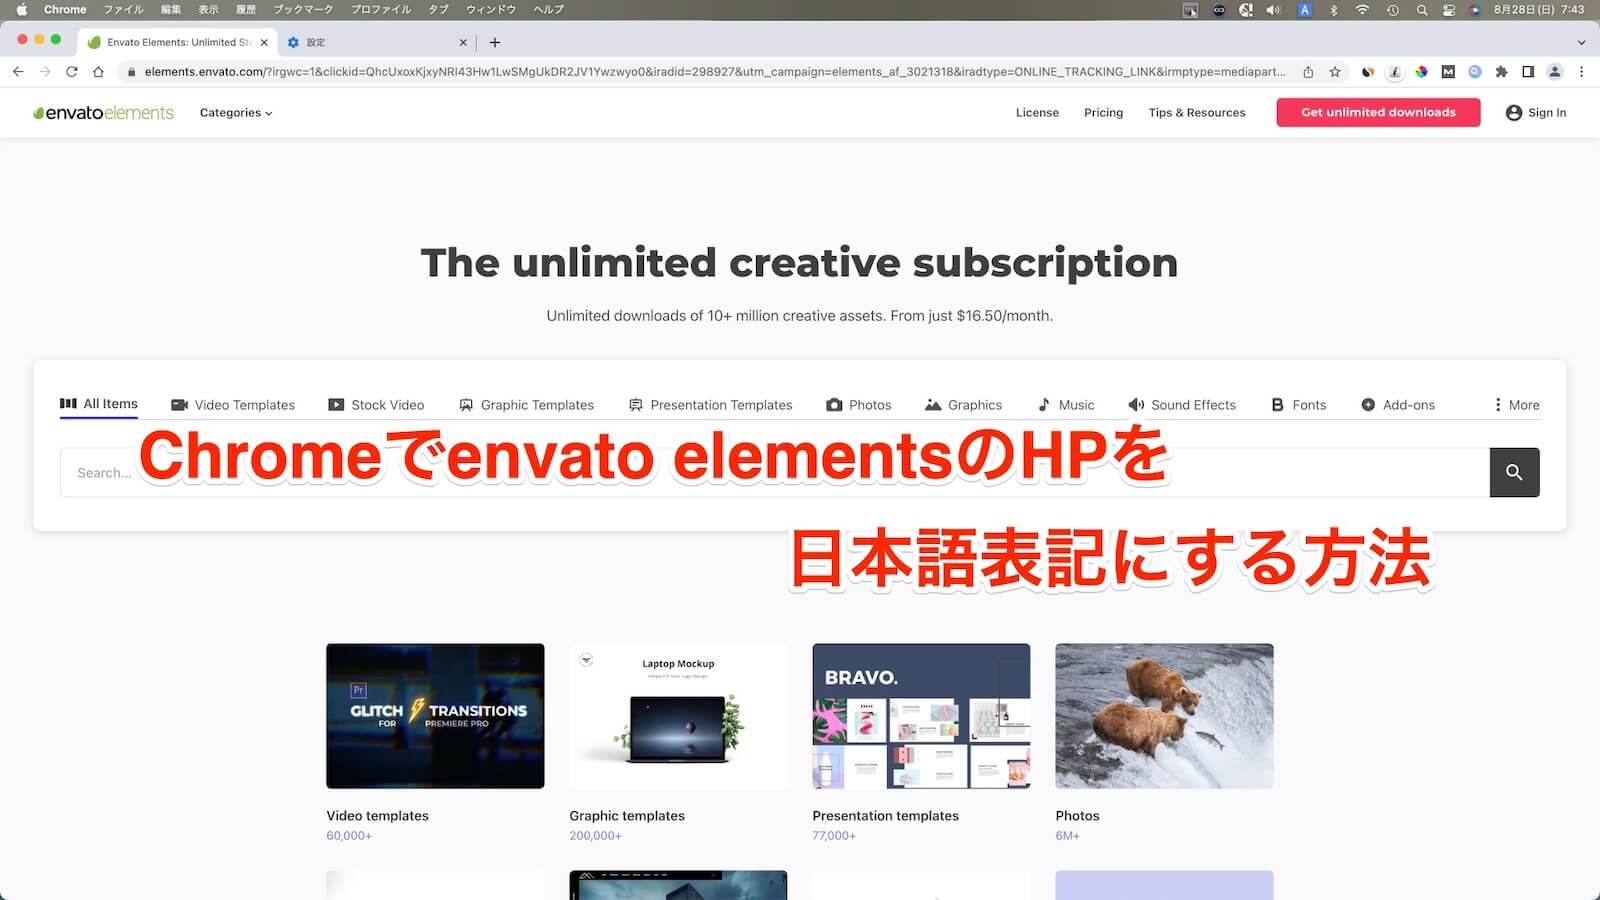 Screenshot of the envato elements homepage